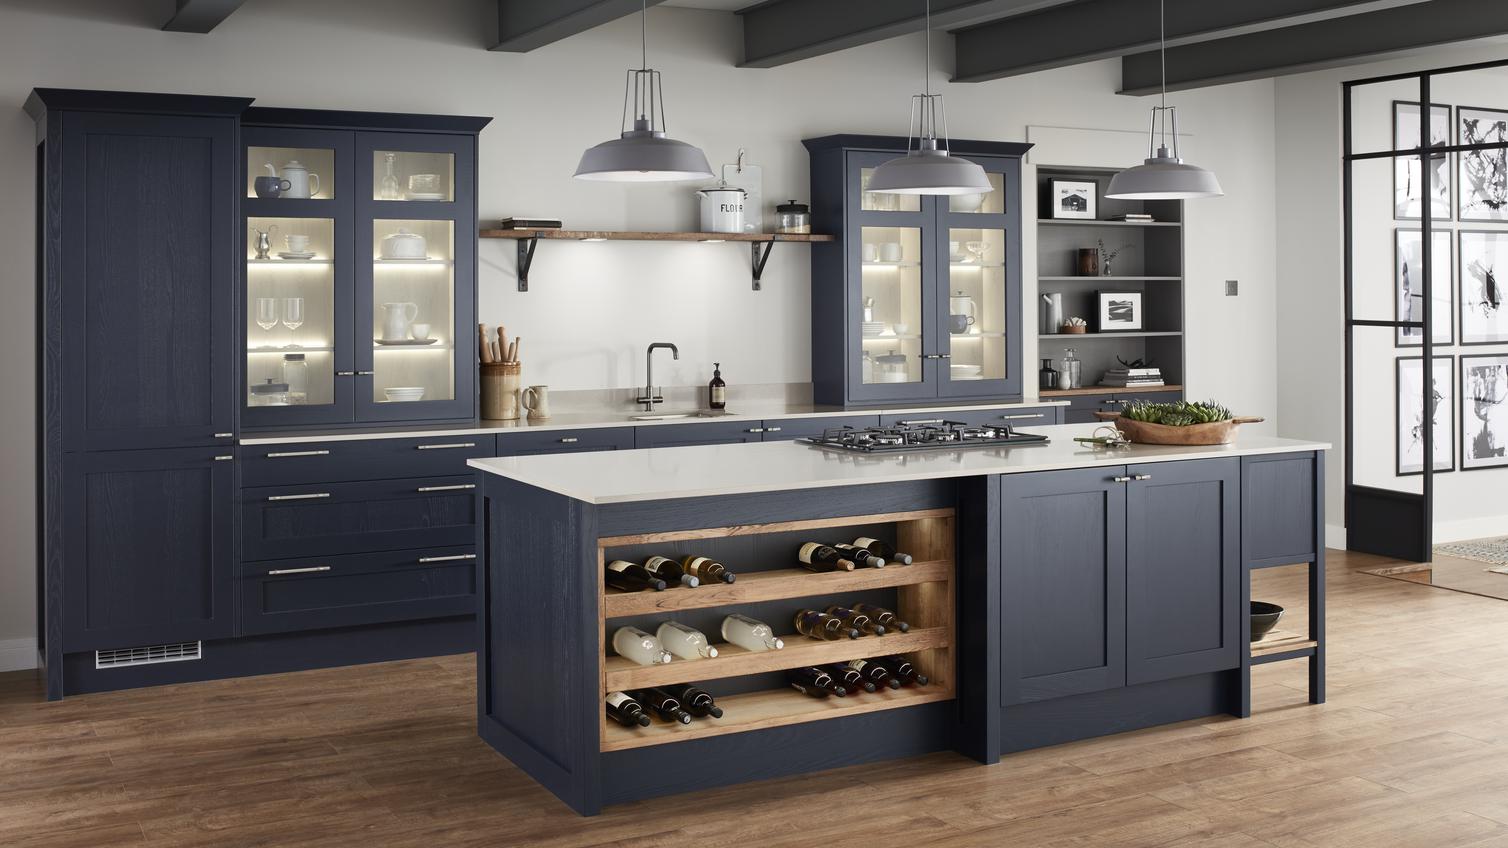 Solid timber framed shaker kitchen in navy blue with island unit, wine rack and worktop mounted glass display cabinets.